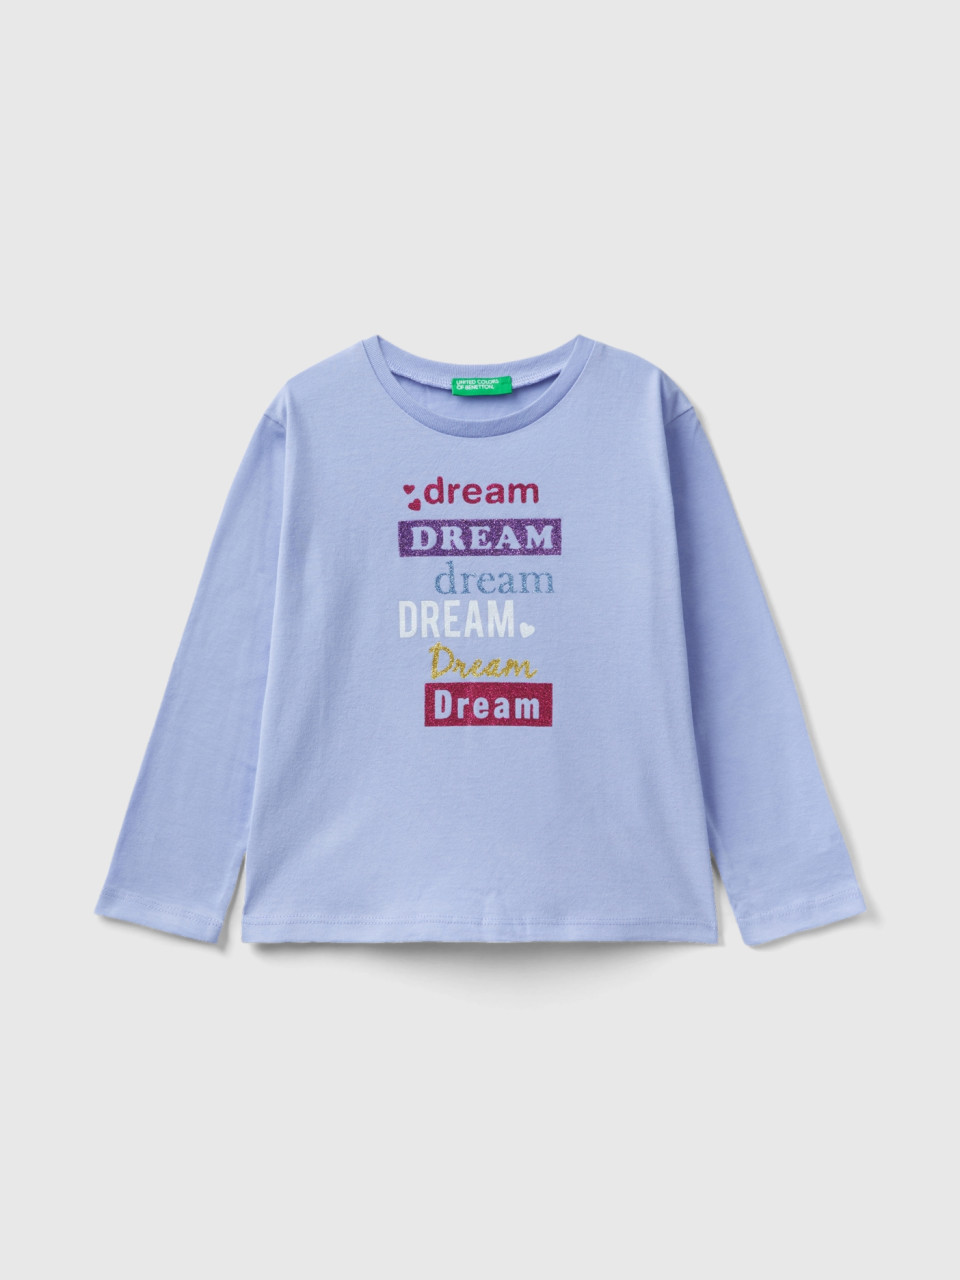 Benetton, Warm T-shirt With Print And Glitter, Lilac, Kids